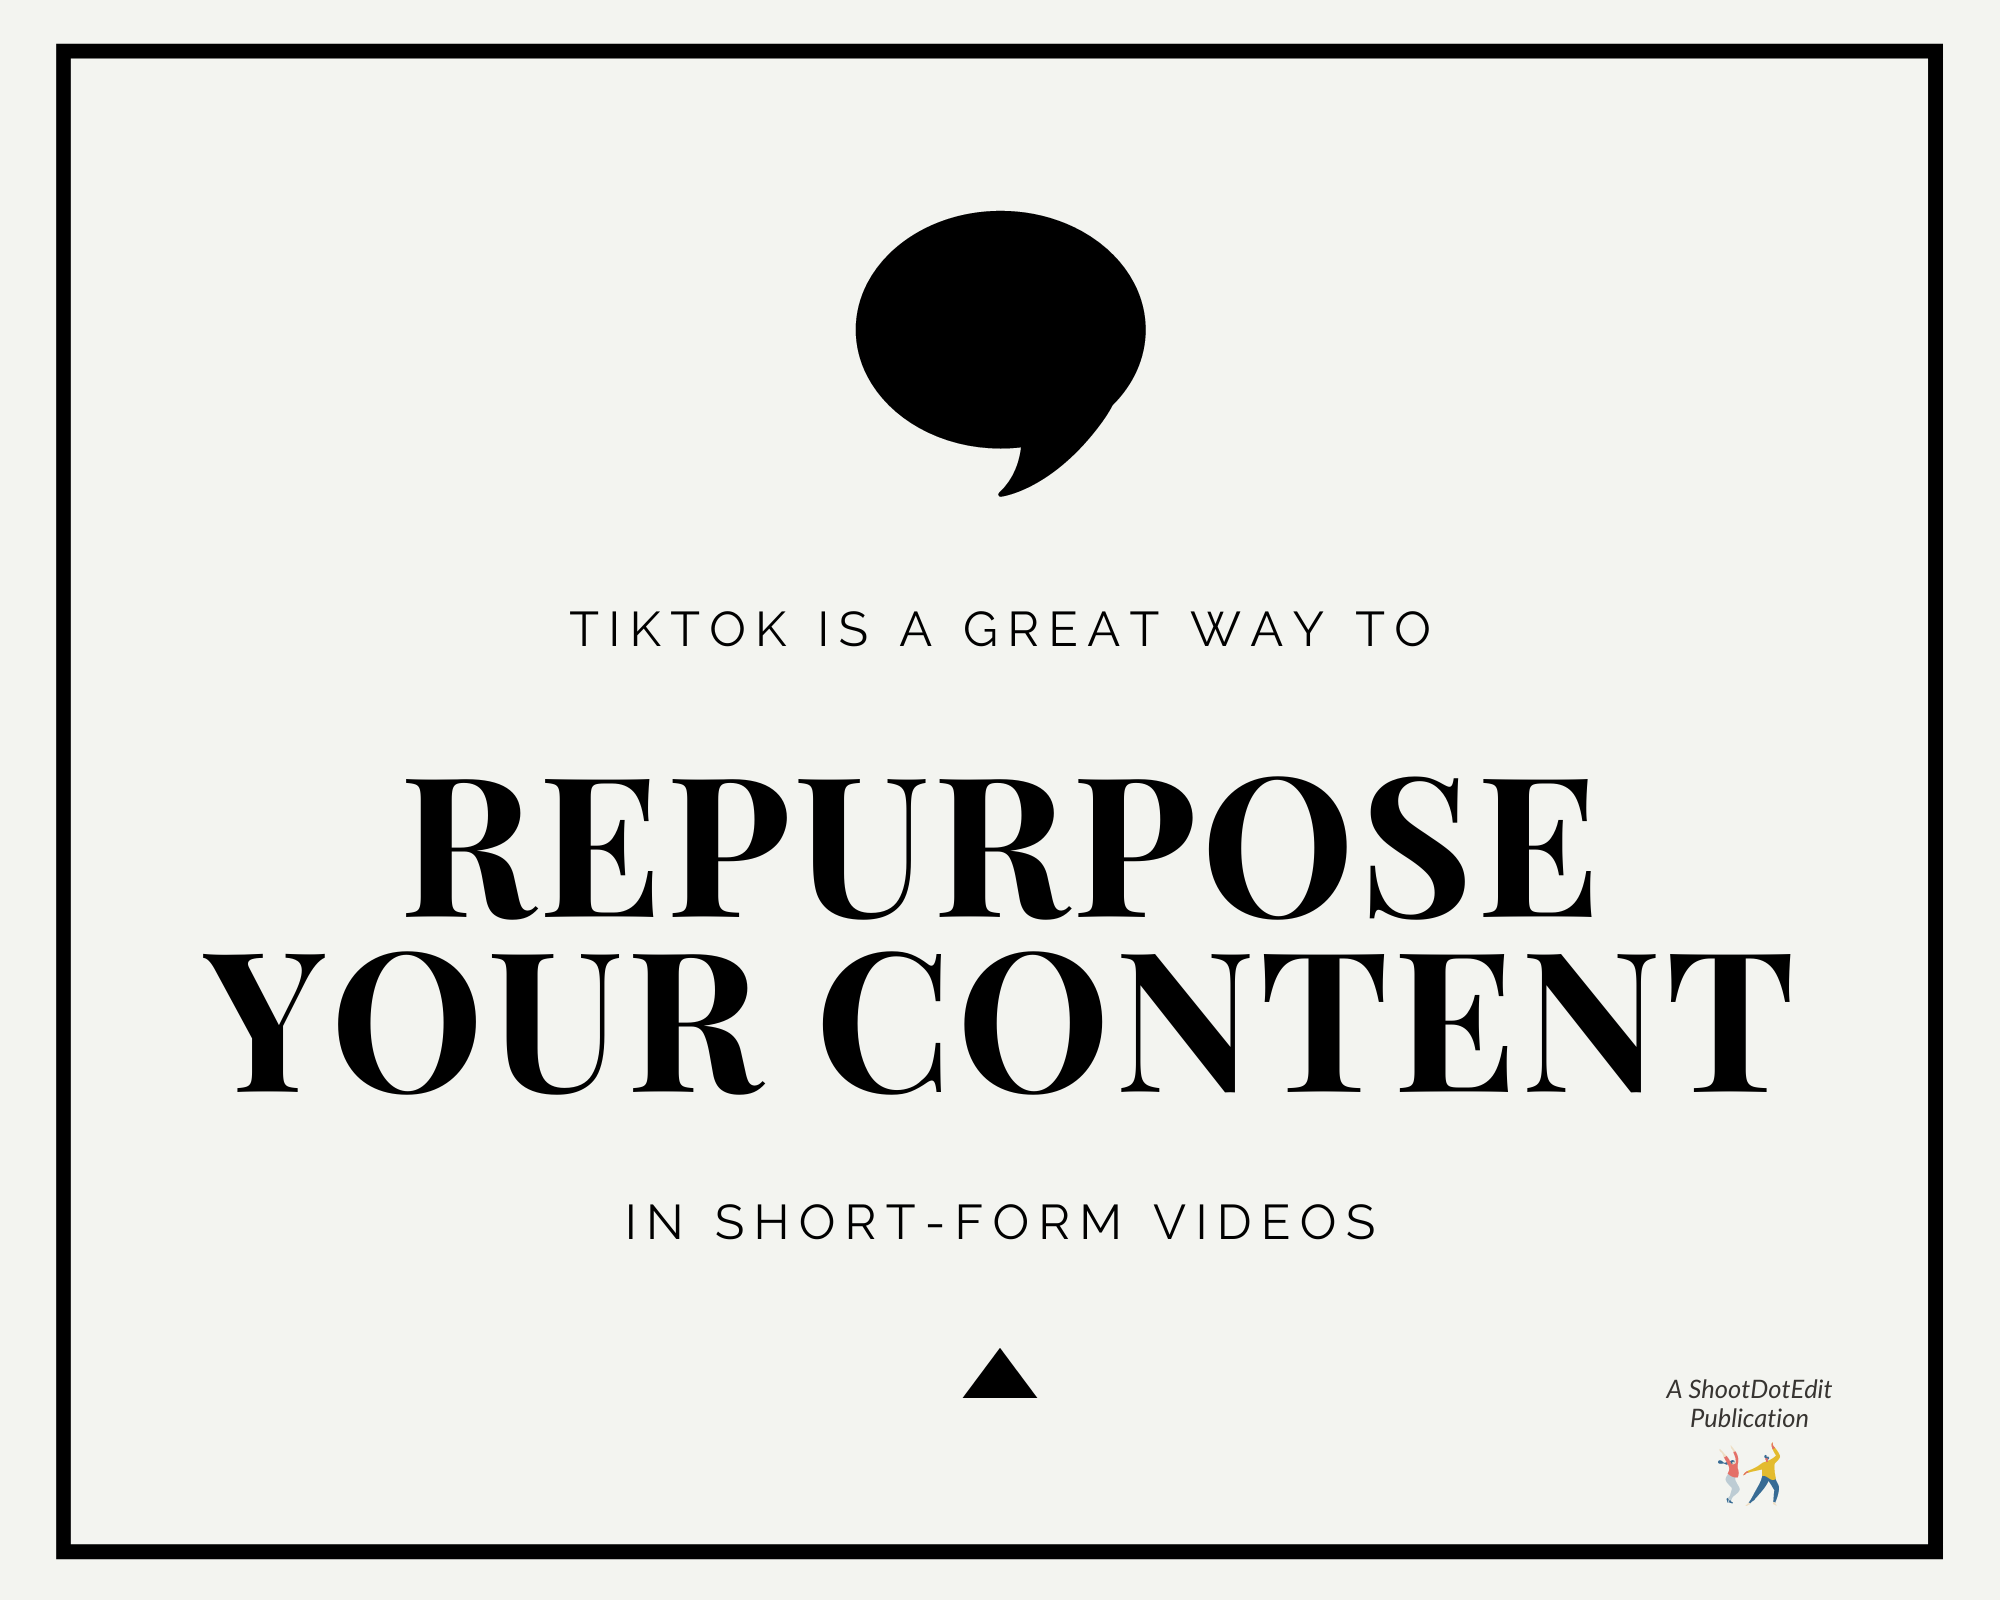 Infographic stating TikTok is a great way to repurpose your content in short form videos